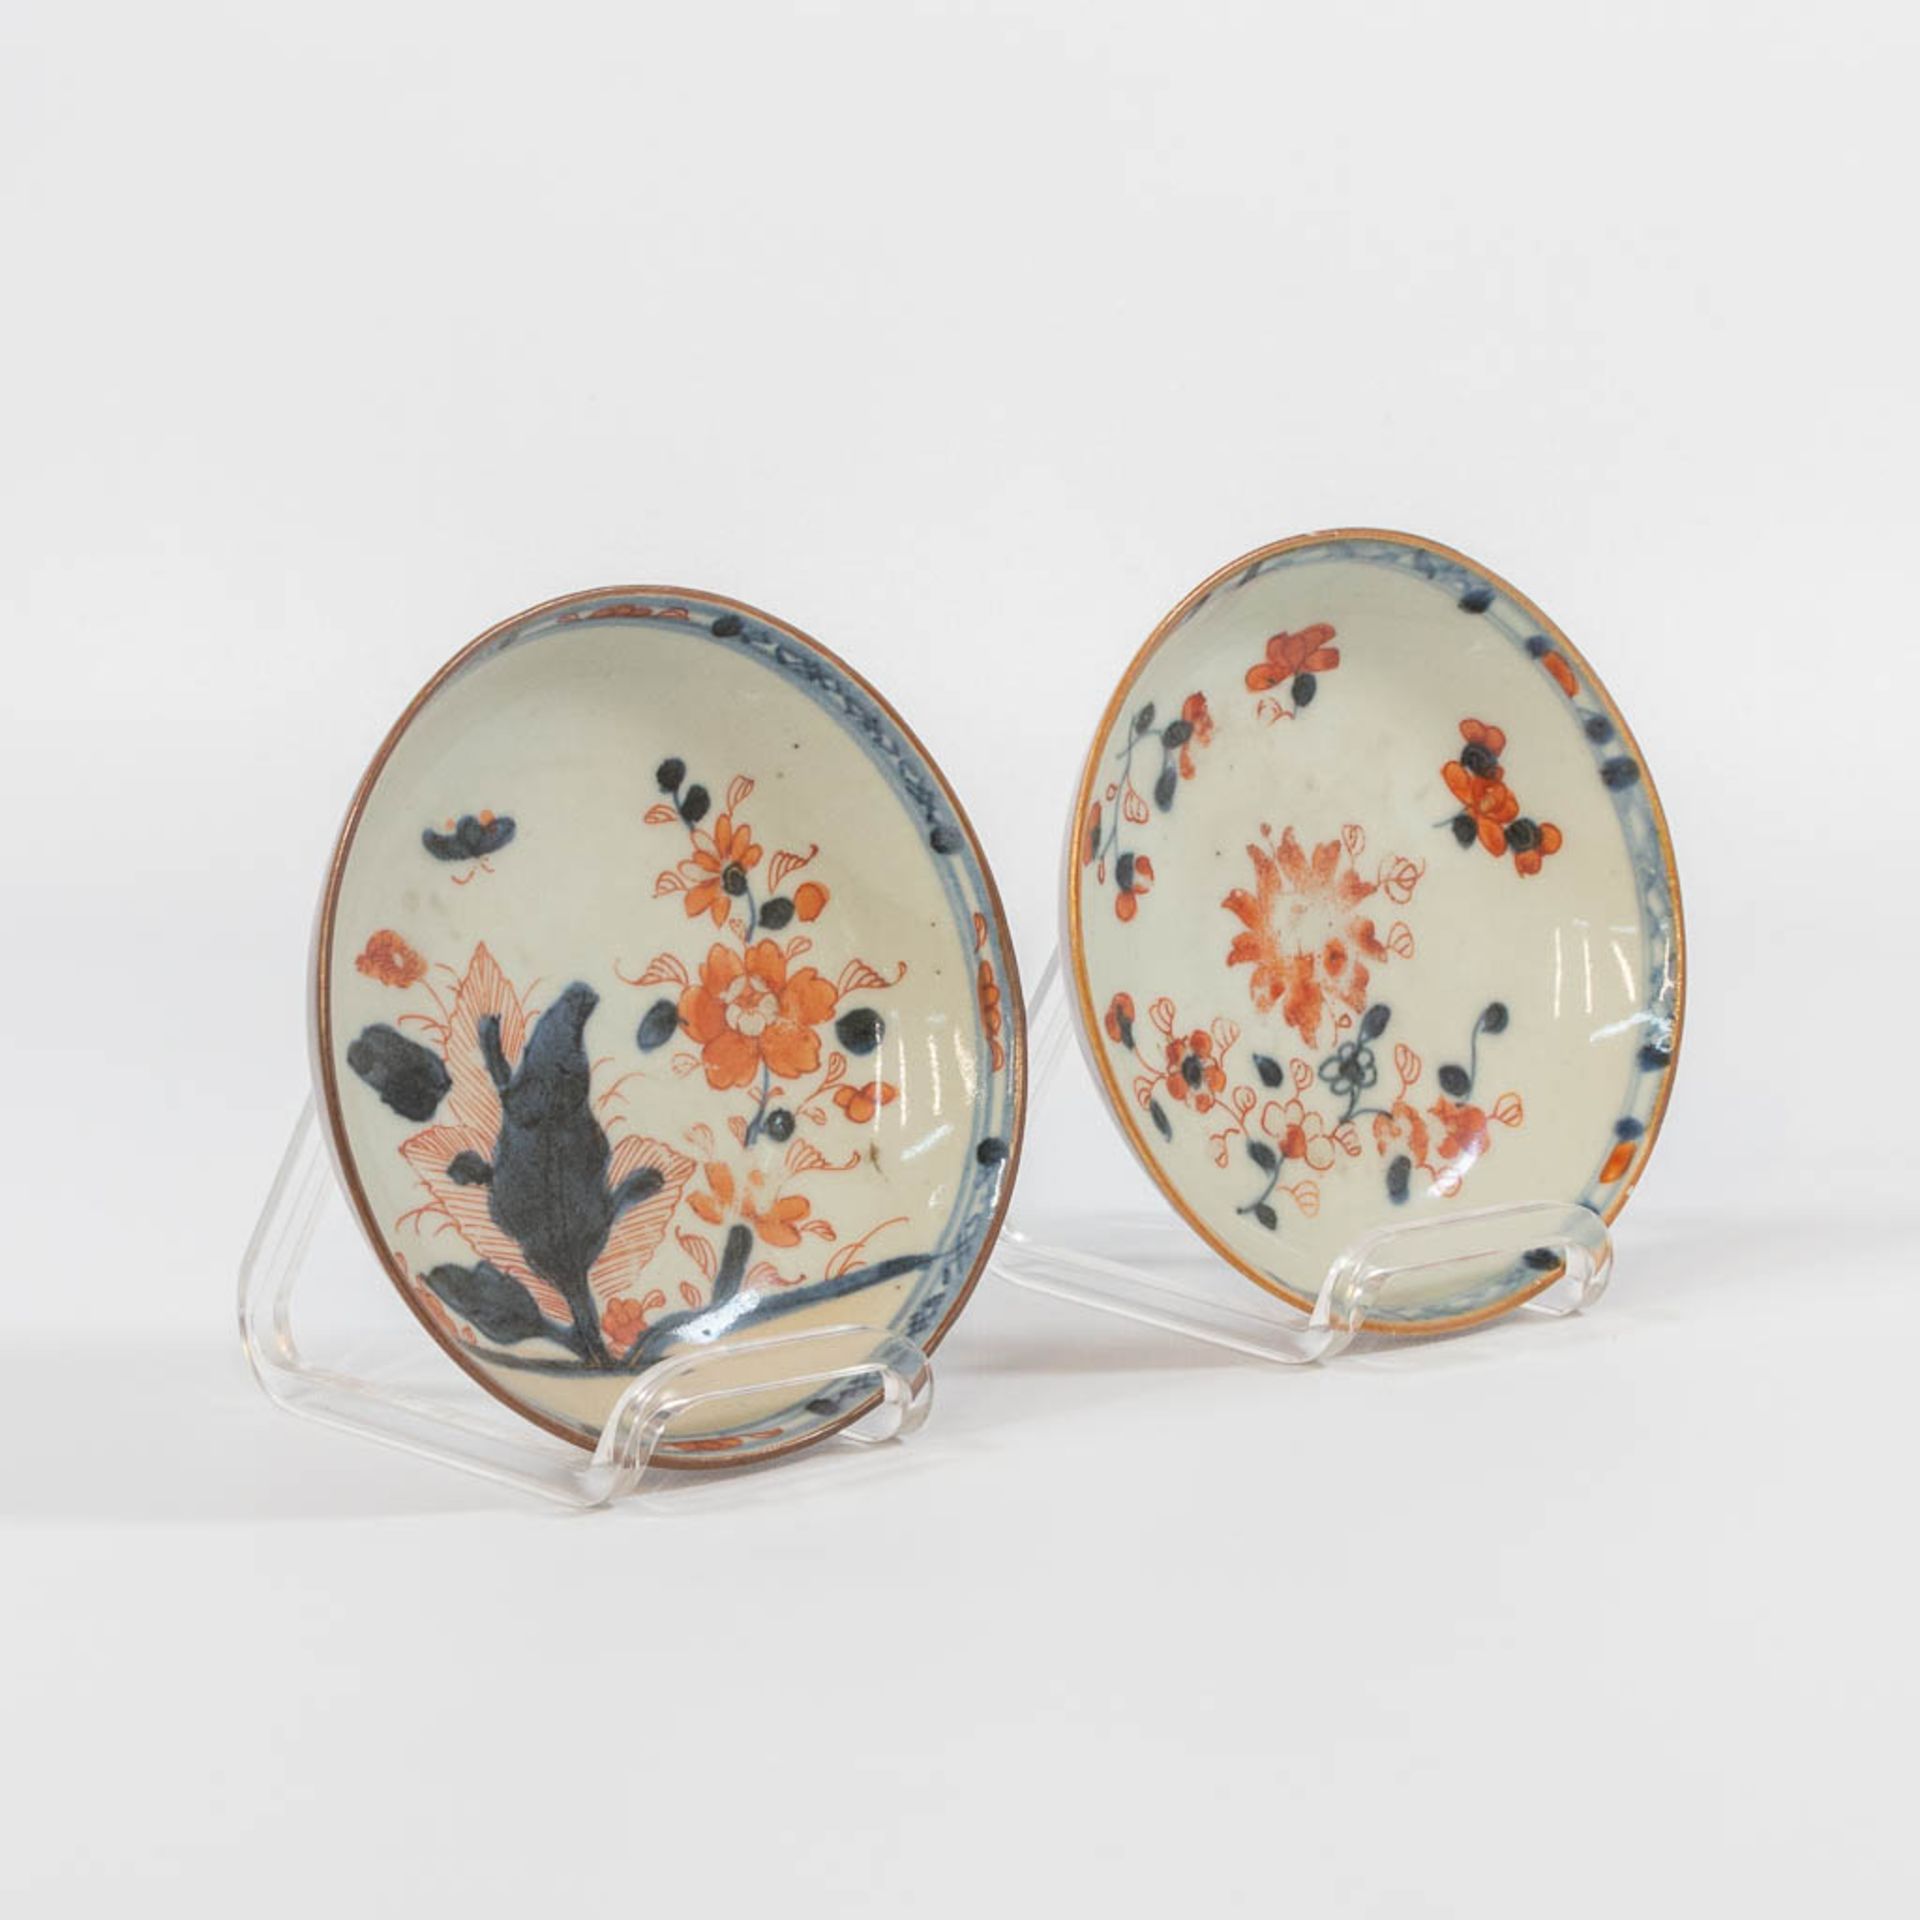 A collection of 12 Capucine Chinese porcelain items, consisting of 5 plates and 7 cups. - Image 17 of 26